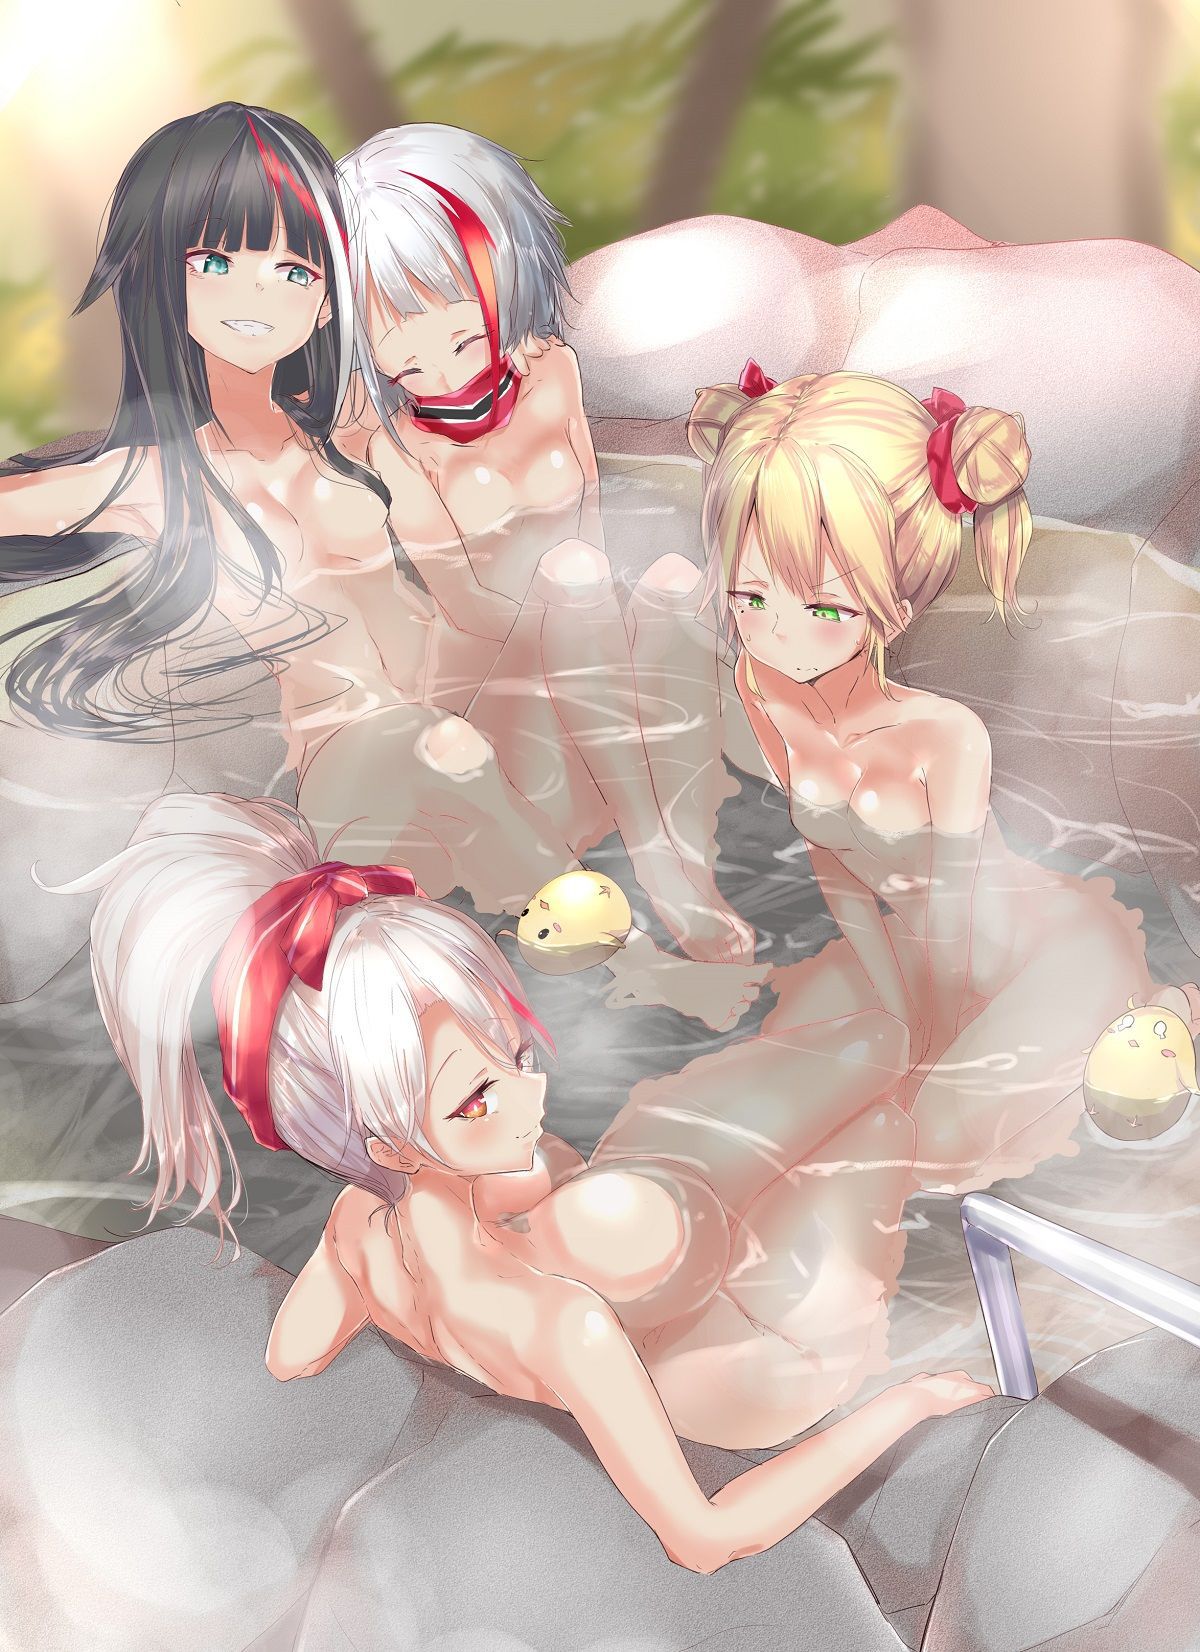 【Secondary erotic】 Erotic images of girls in baths and hot springs where nudes can worship are here 19